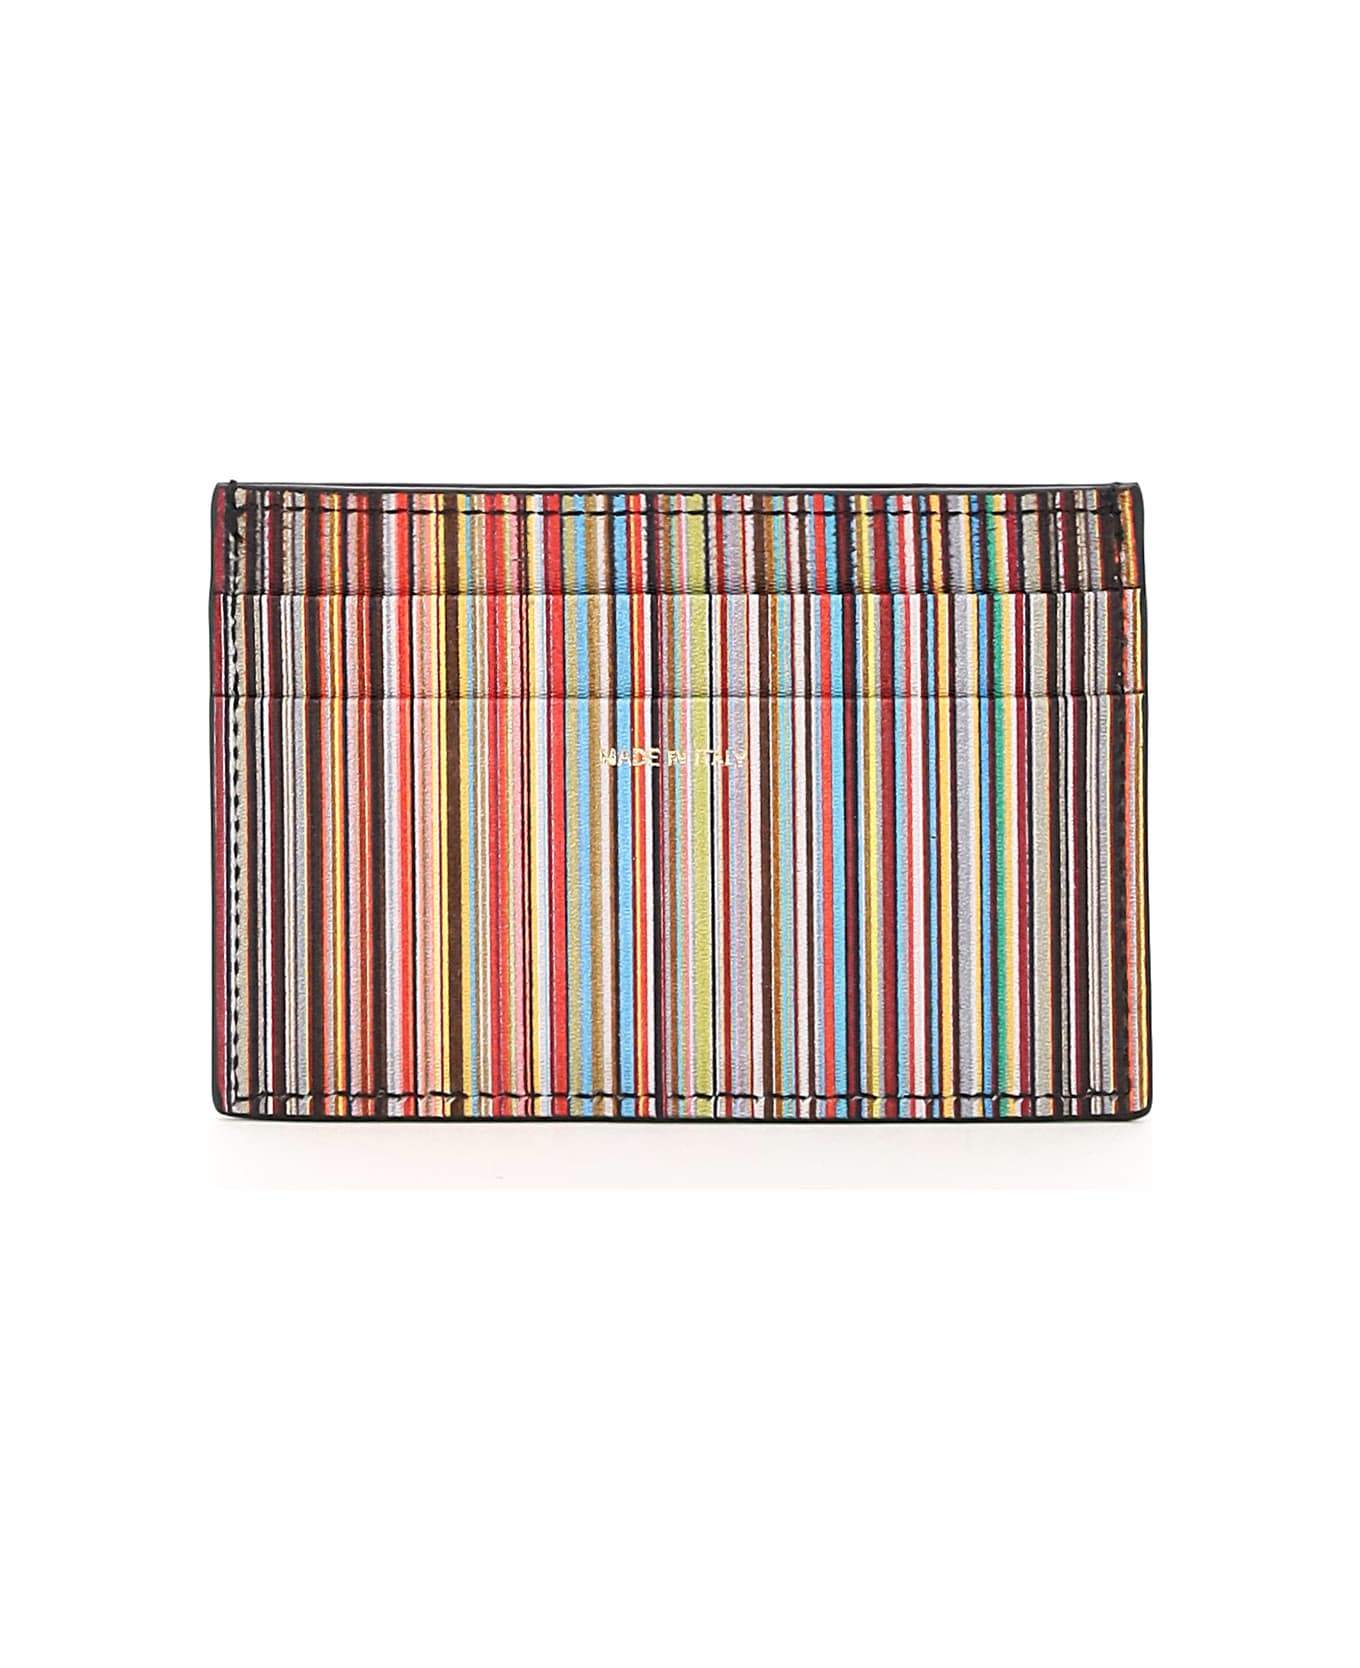 Paul Smith Striped Card Holder - BLACK/RED